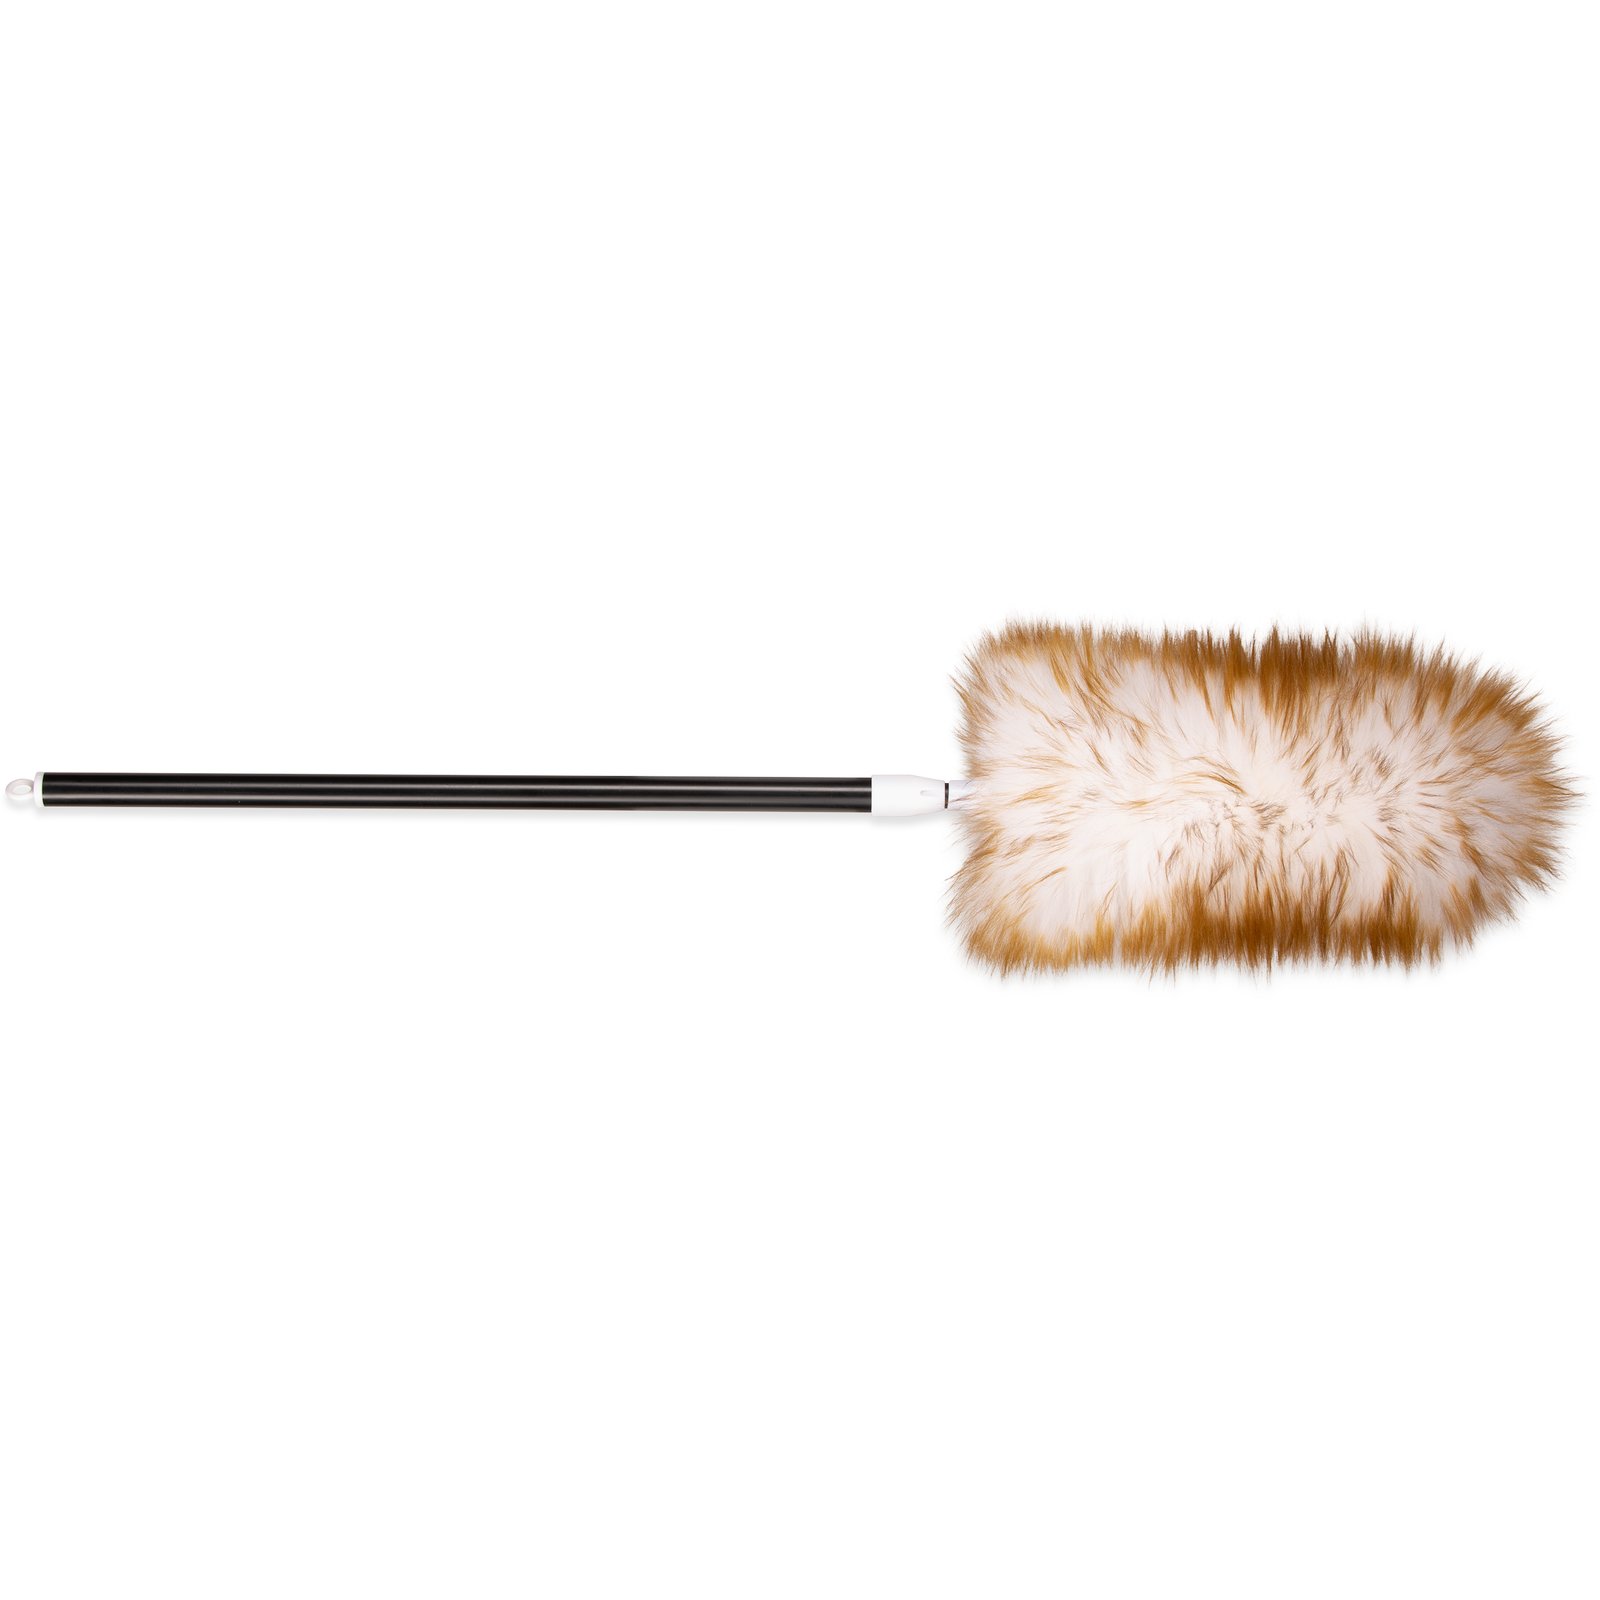 Lavex 30 - 45 Lambswool Duster with Telescopic Handle